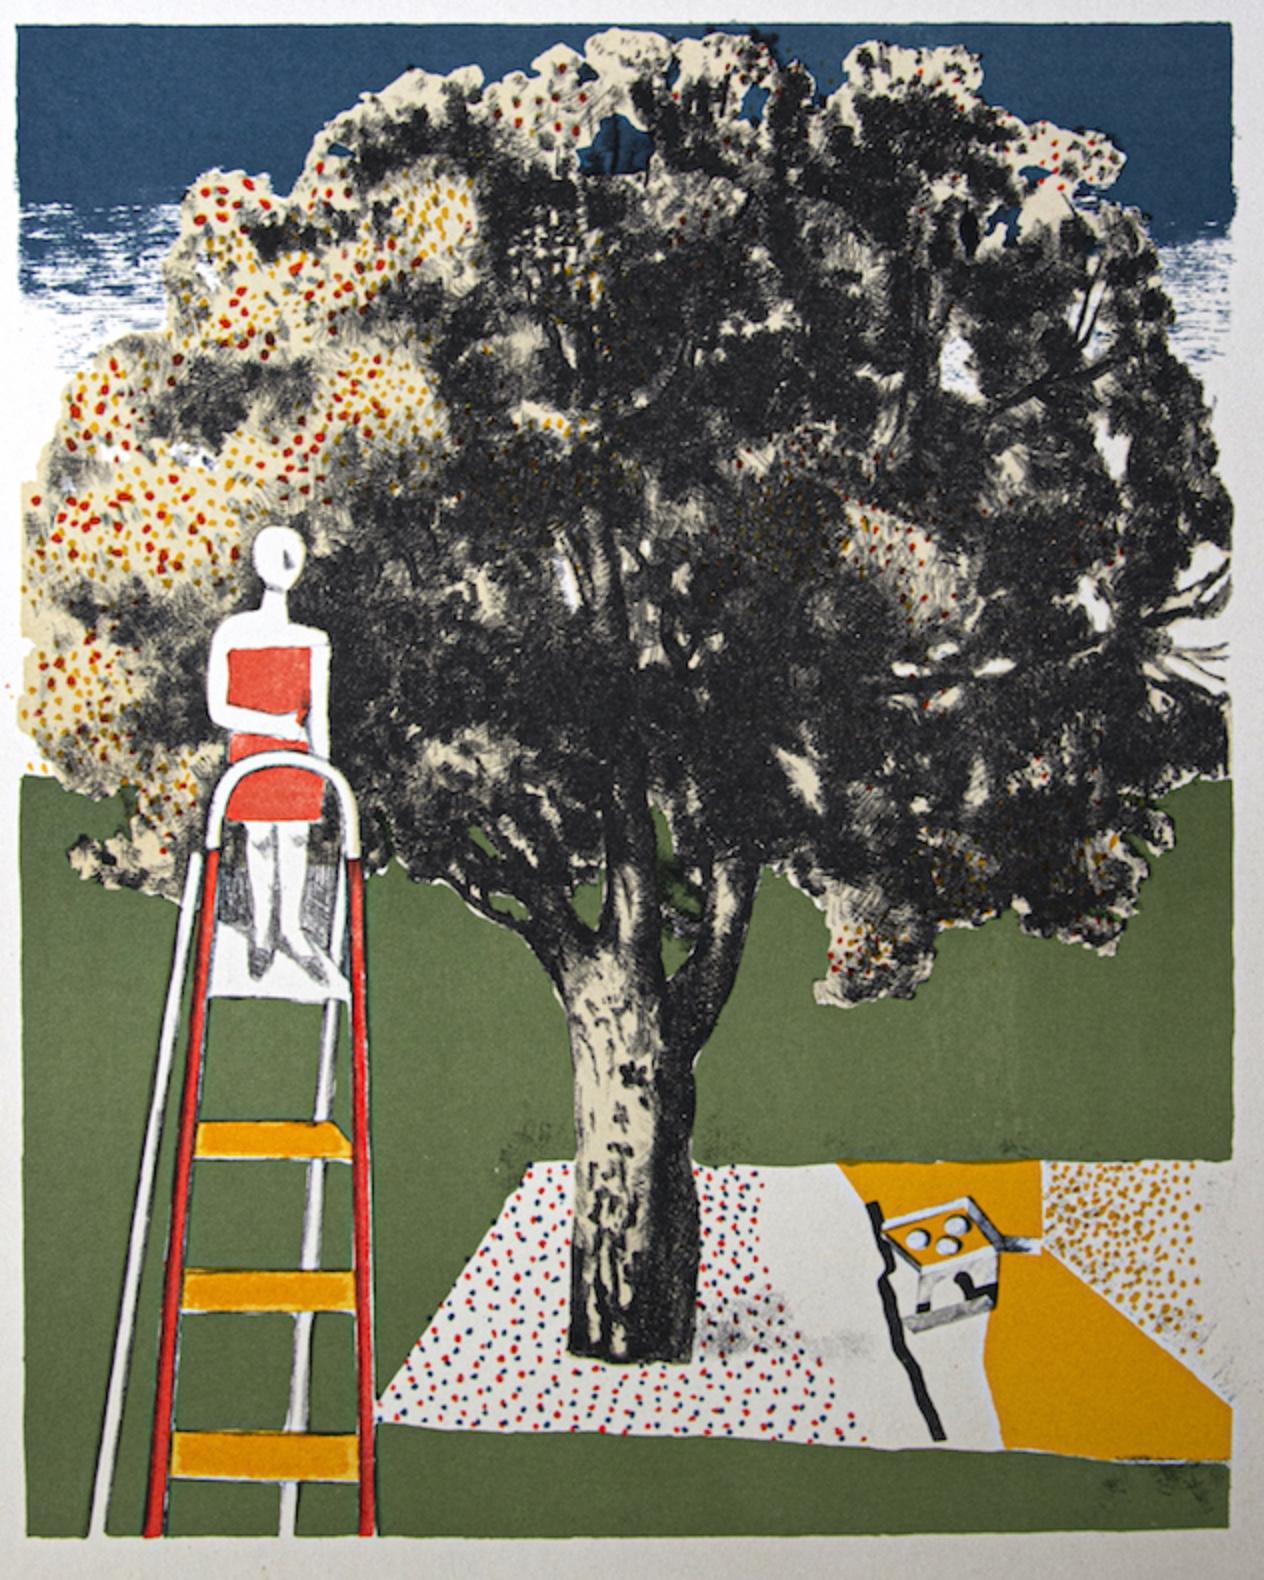 Figure and Tree is a Vintage Offset Print on ivory-colored paper, realized by Franco Gentilini (Italian Painter, 1909-1981), in 1970s.

The state of preservation of the artwork is excellent.

Franco Gentilini (Italian Painter, 1909-1981):